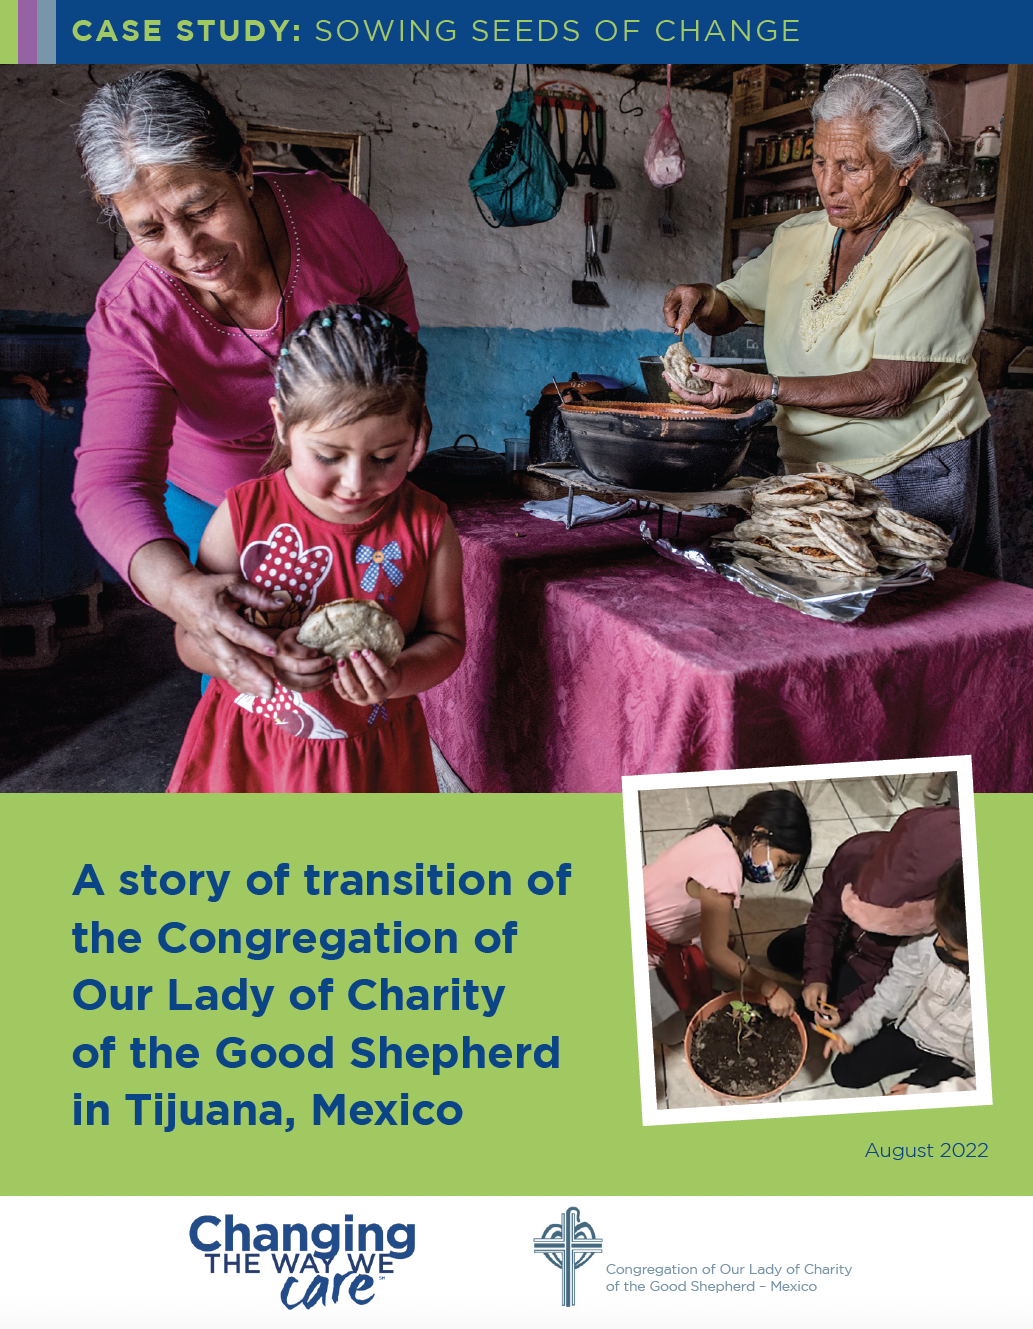 A Story of Transition of the Congregation of Our Lady of Charity of the Good Shepherd in Tijuana, Mexico